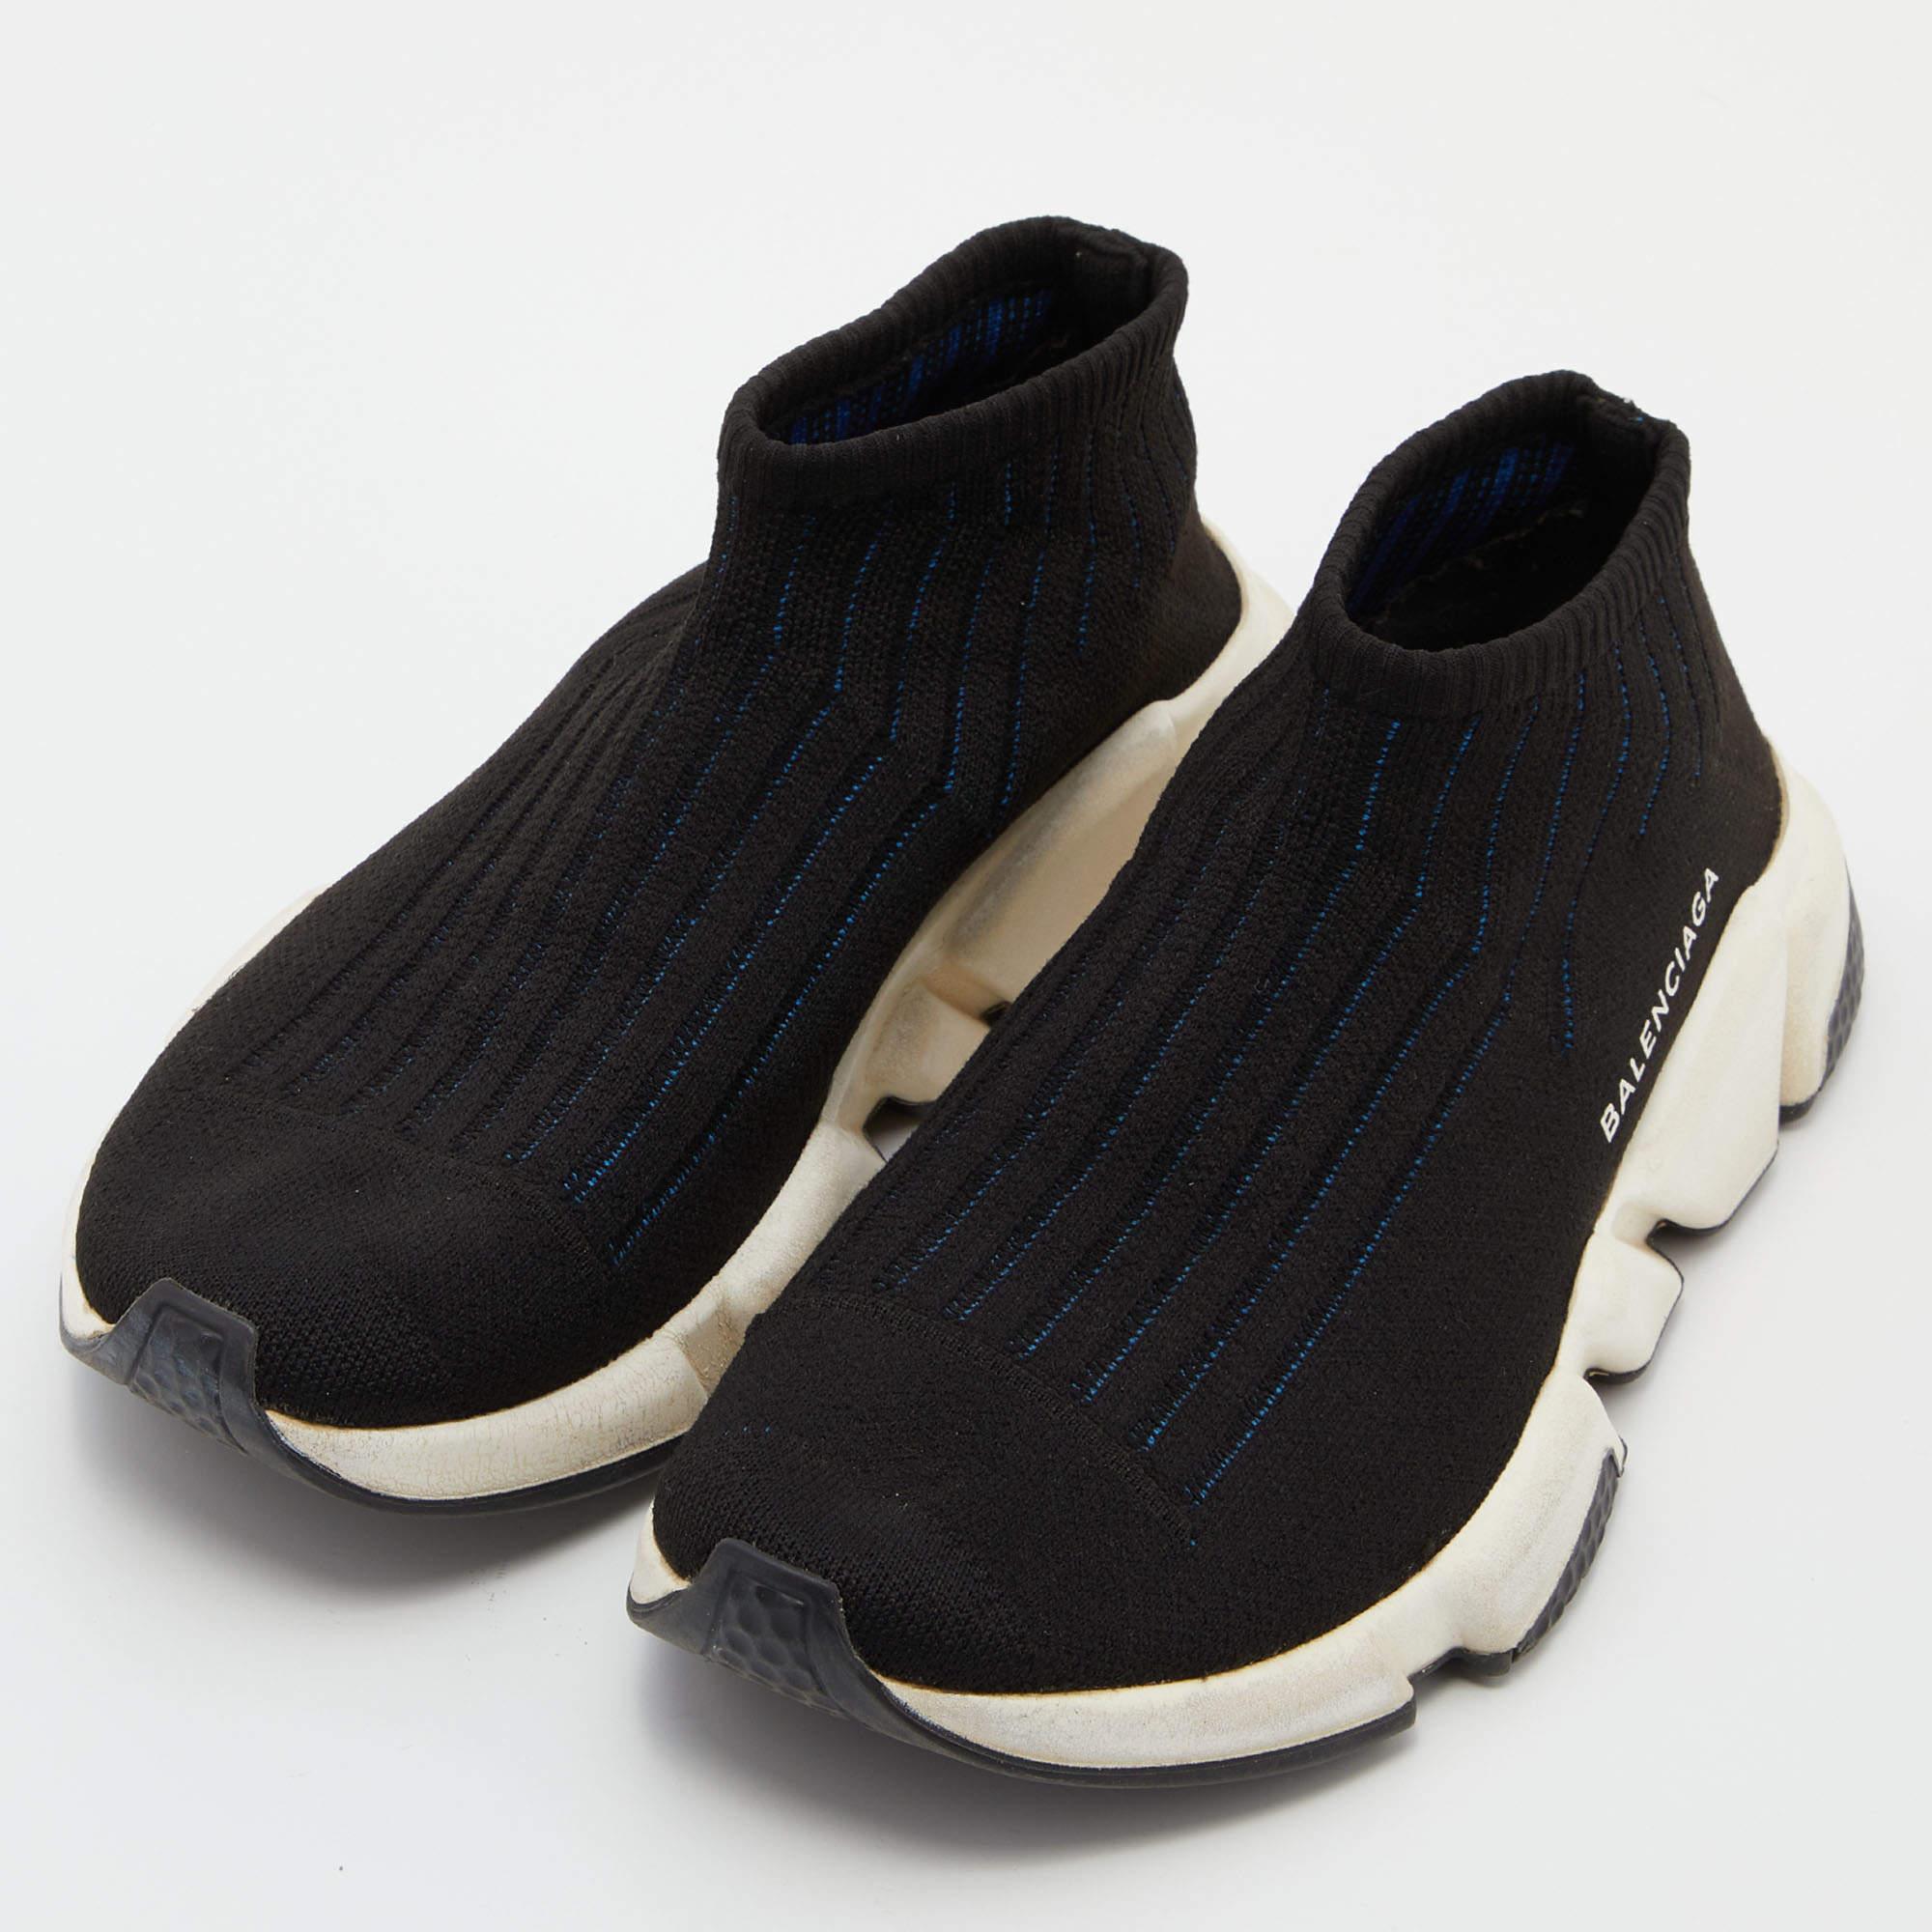 Celebrating the fusion of sports and luxury fashion, these Balenciaga Speed Trainer sneakers are absolutely worth the splurge. They are laceless and so well-crafted with knit fabric in a sock style. The sneakers are also designed with shock